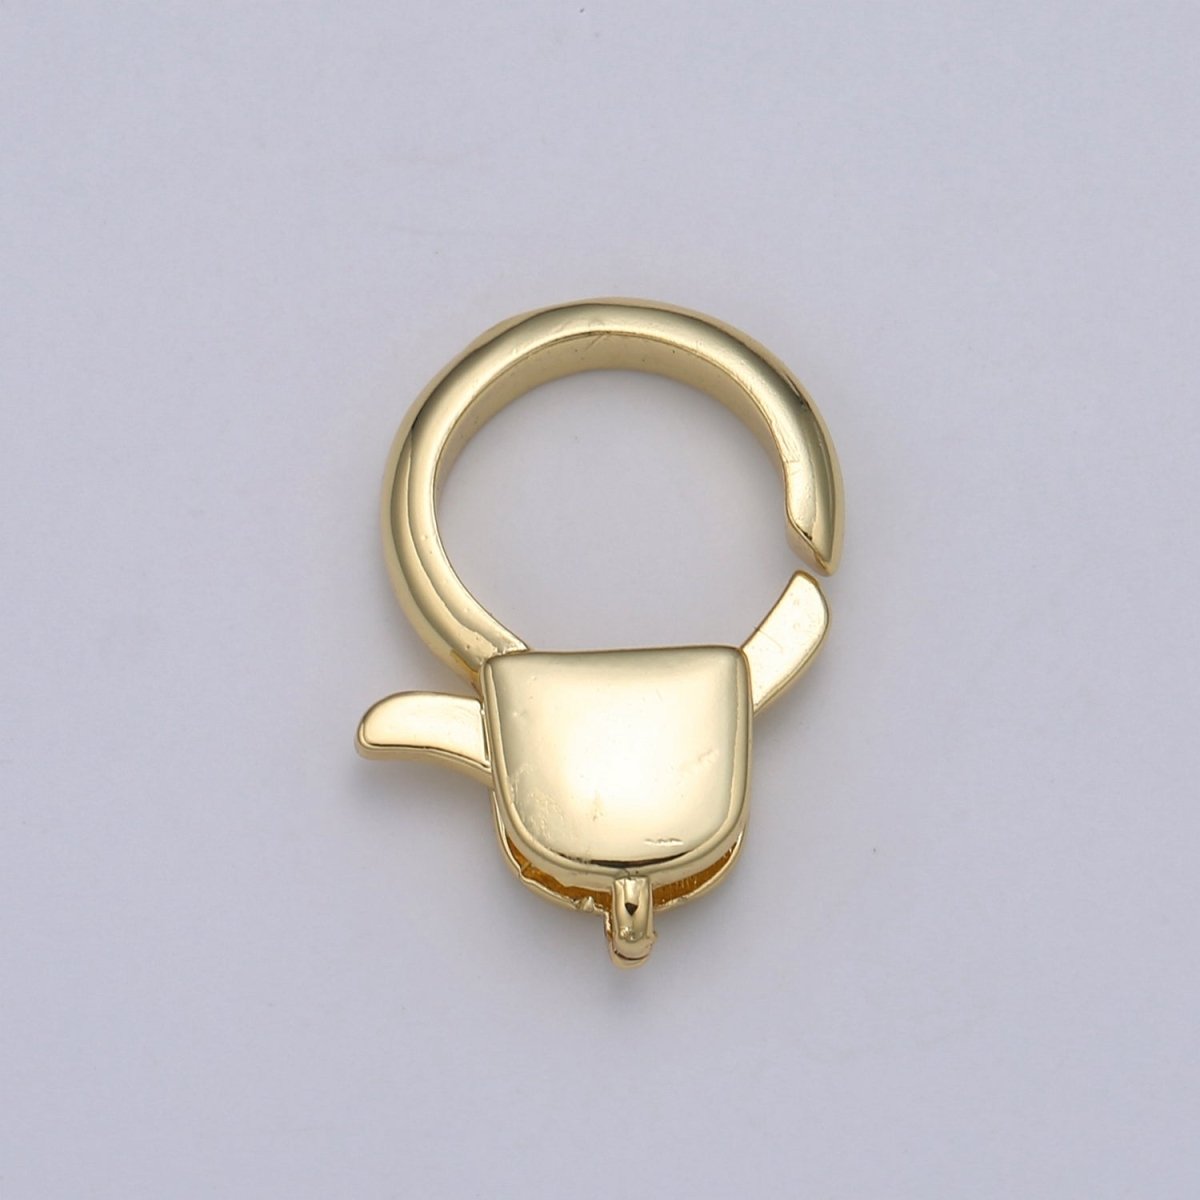 Wholesale Lobster Clasp 24k Gold Circle Head Lobster Claw for Jewelry Making, Size Option 19.3MMX13.3MM L-175 - DLUXCA